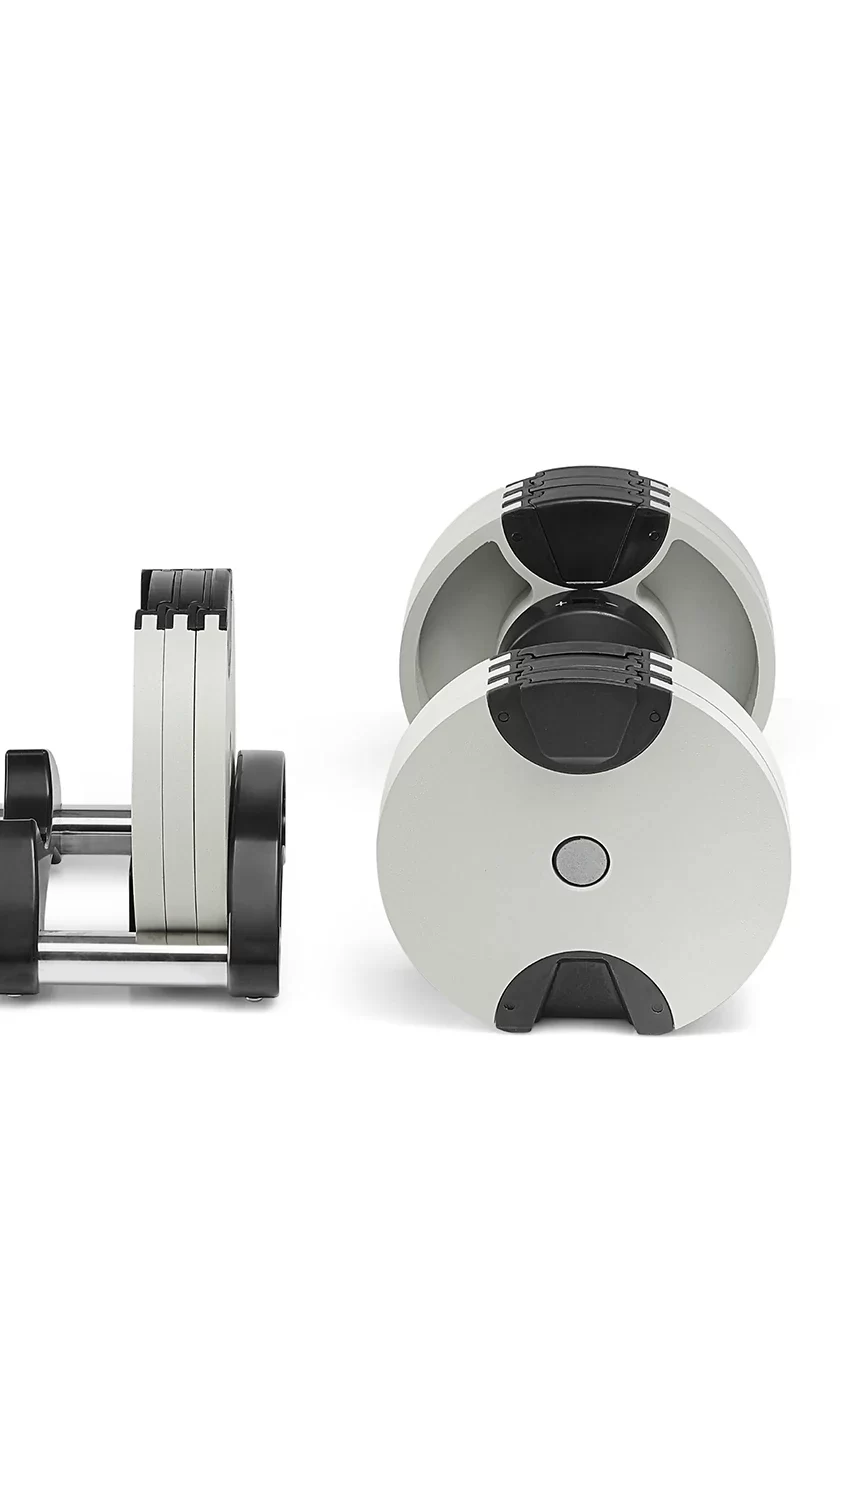 cube powerbells dumbbell for home gym